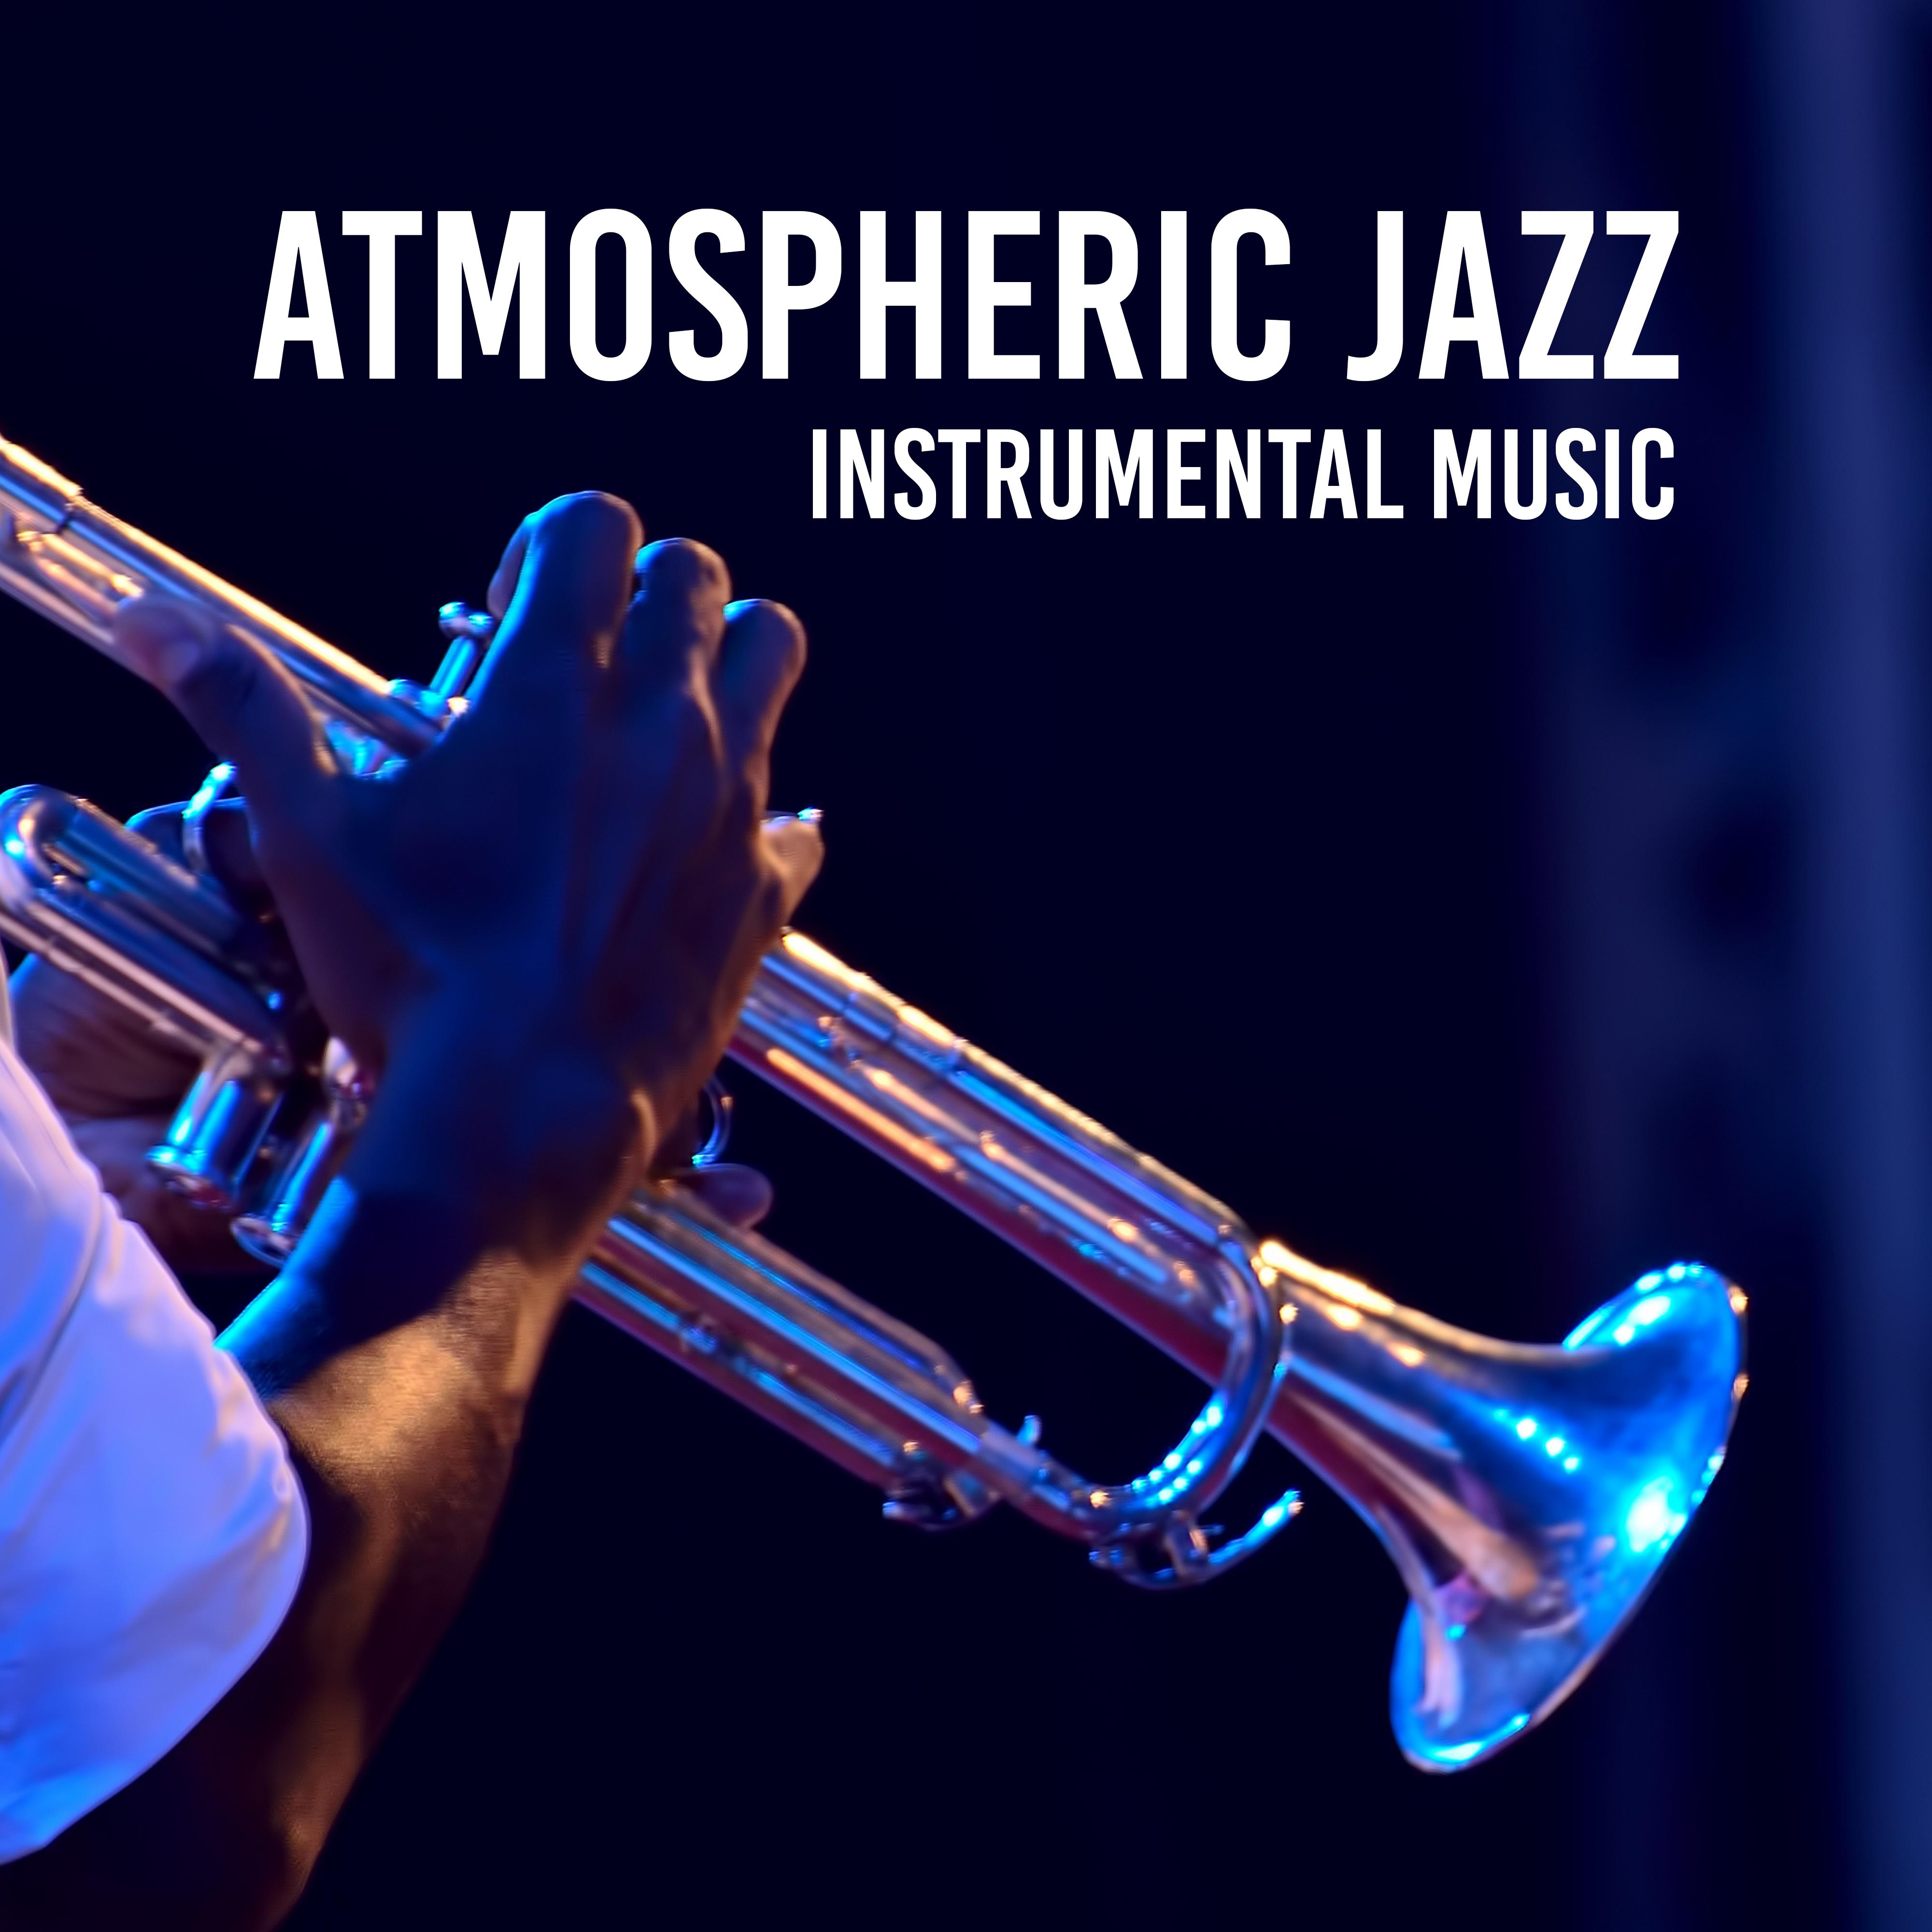 Atmospheric Jazz Instrumental Music - the Most Beautiful Jazz Compositions to Listen to Relaxation and Well-Deserved Rest